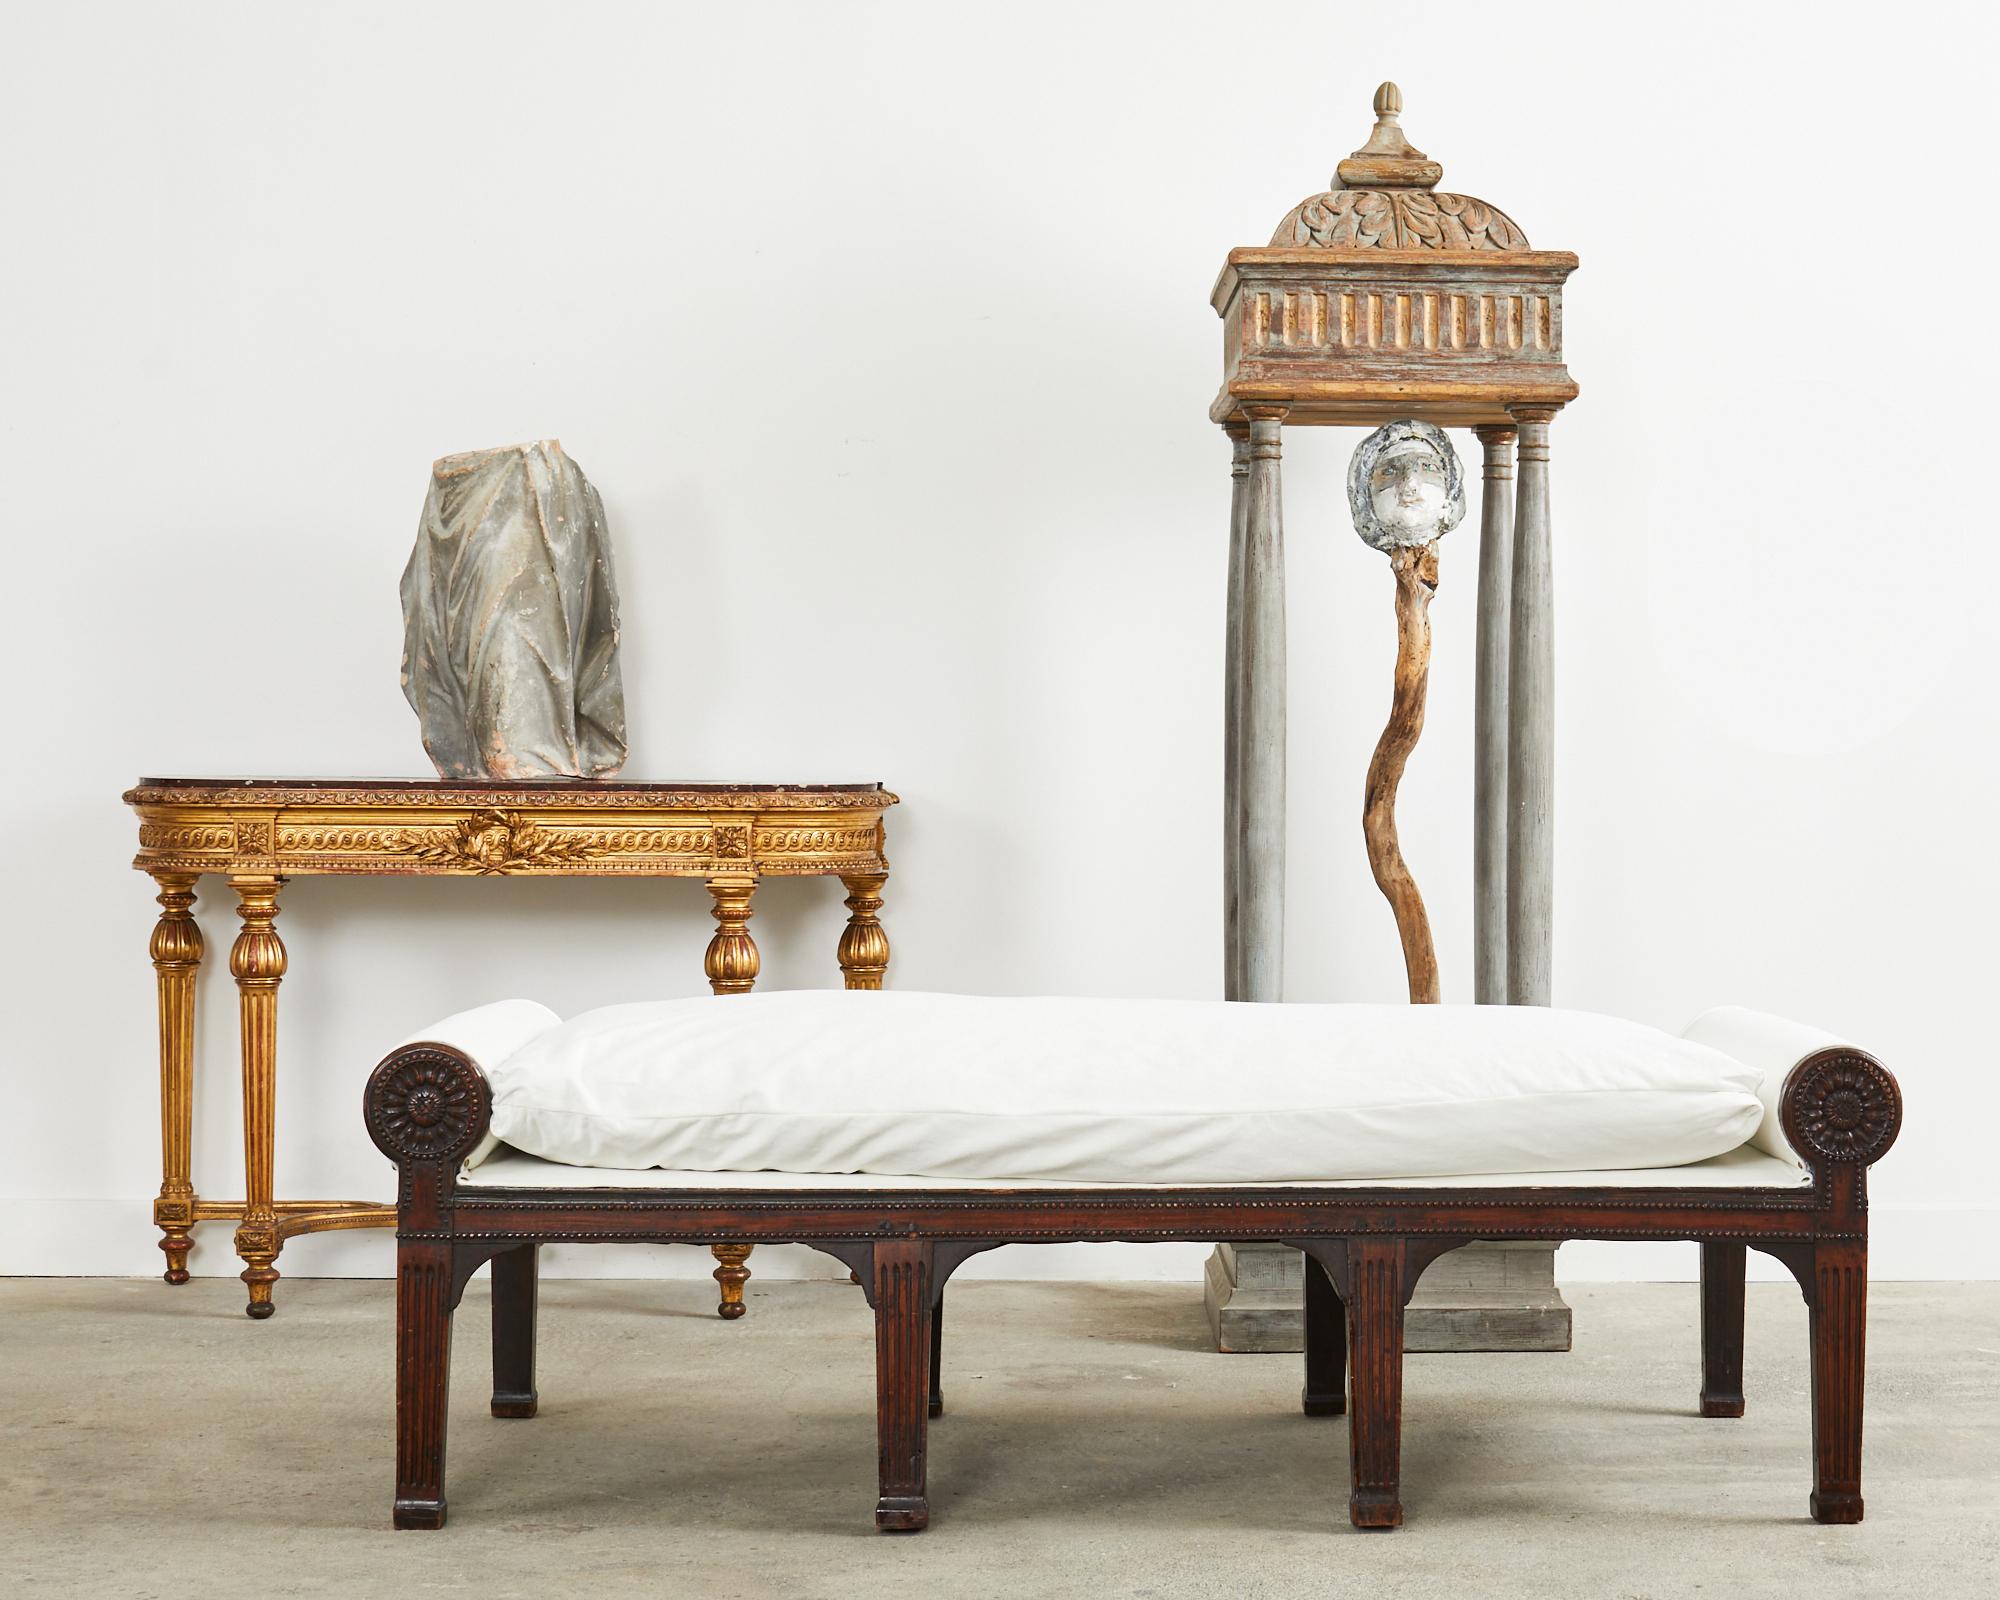 Distinctive 19th century walnut daybed or bench seat made in the grand French Napoleon III period. The walnut frame features large round padded bolsters on each end decorated with stylized floral motifs. Supported by eight neoclassical fluted column